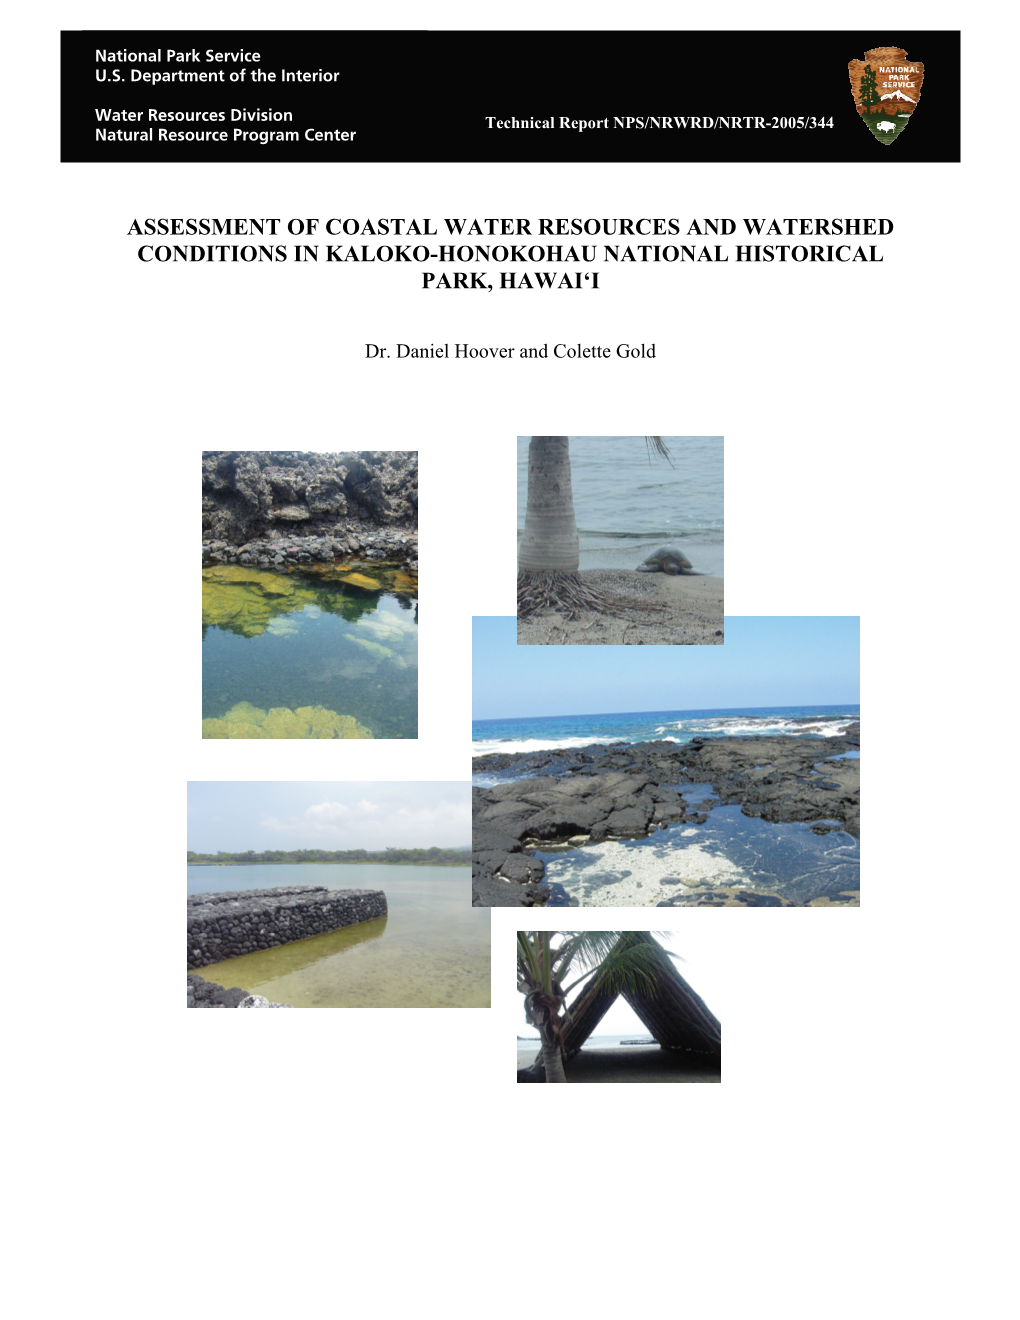 Assessment of Coastal Water Resources and Watershed Conditions in Kaloko-Honokohau National Historical Park, Hawai‘I